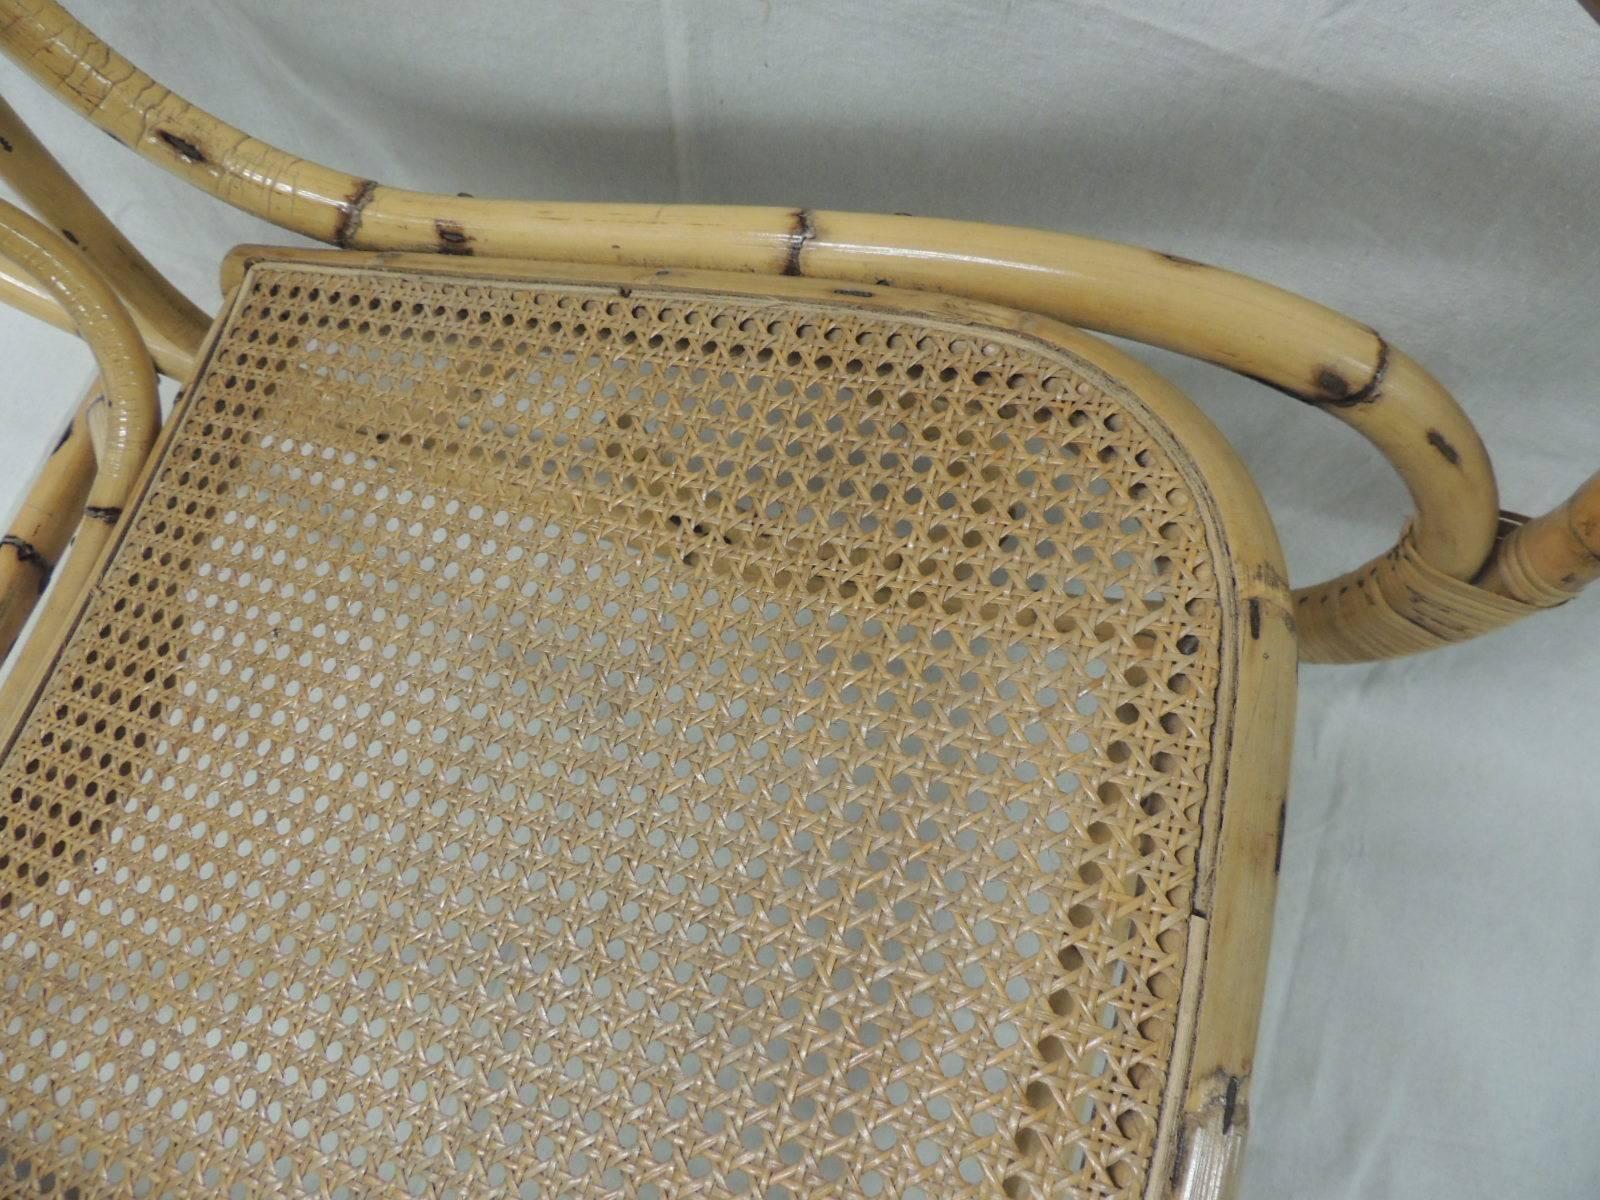 Vintage bamboo and wicker armed rocking chair
1970s vintage bamboo and wicker armed rocking chair with back and set on a trellis design. No repairs or damage in the canning and very sturdy.
Palm beach style, coastal living, porch.
Size: 39” BH x